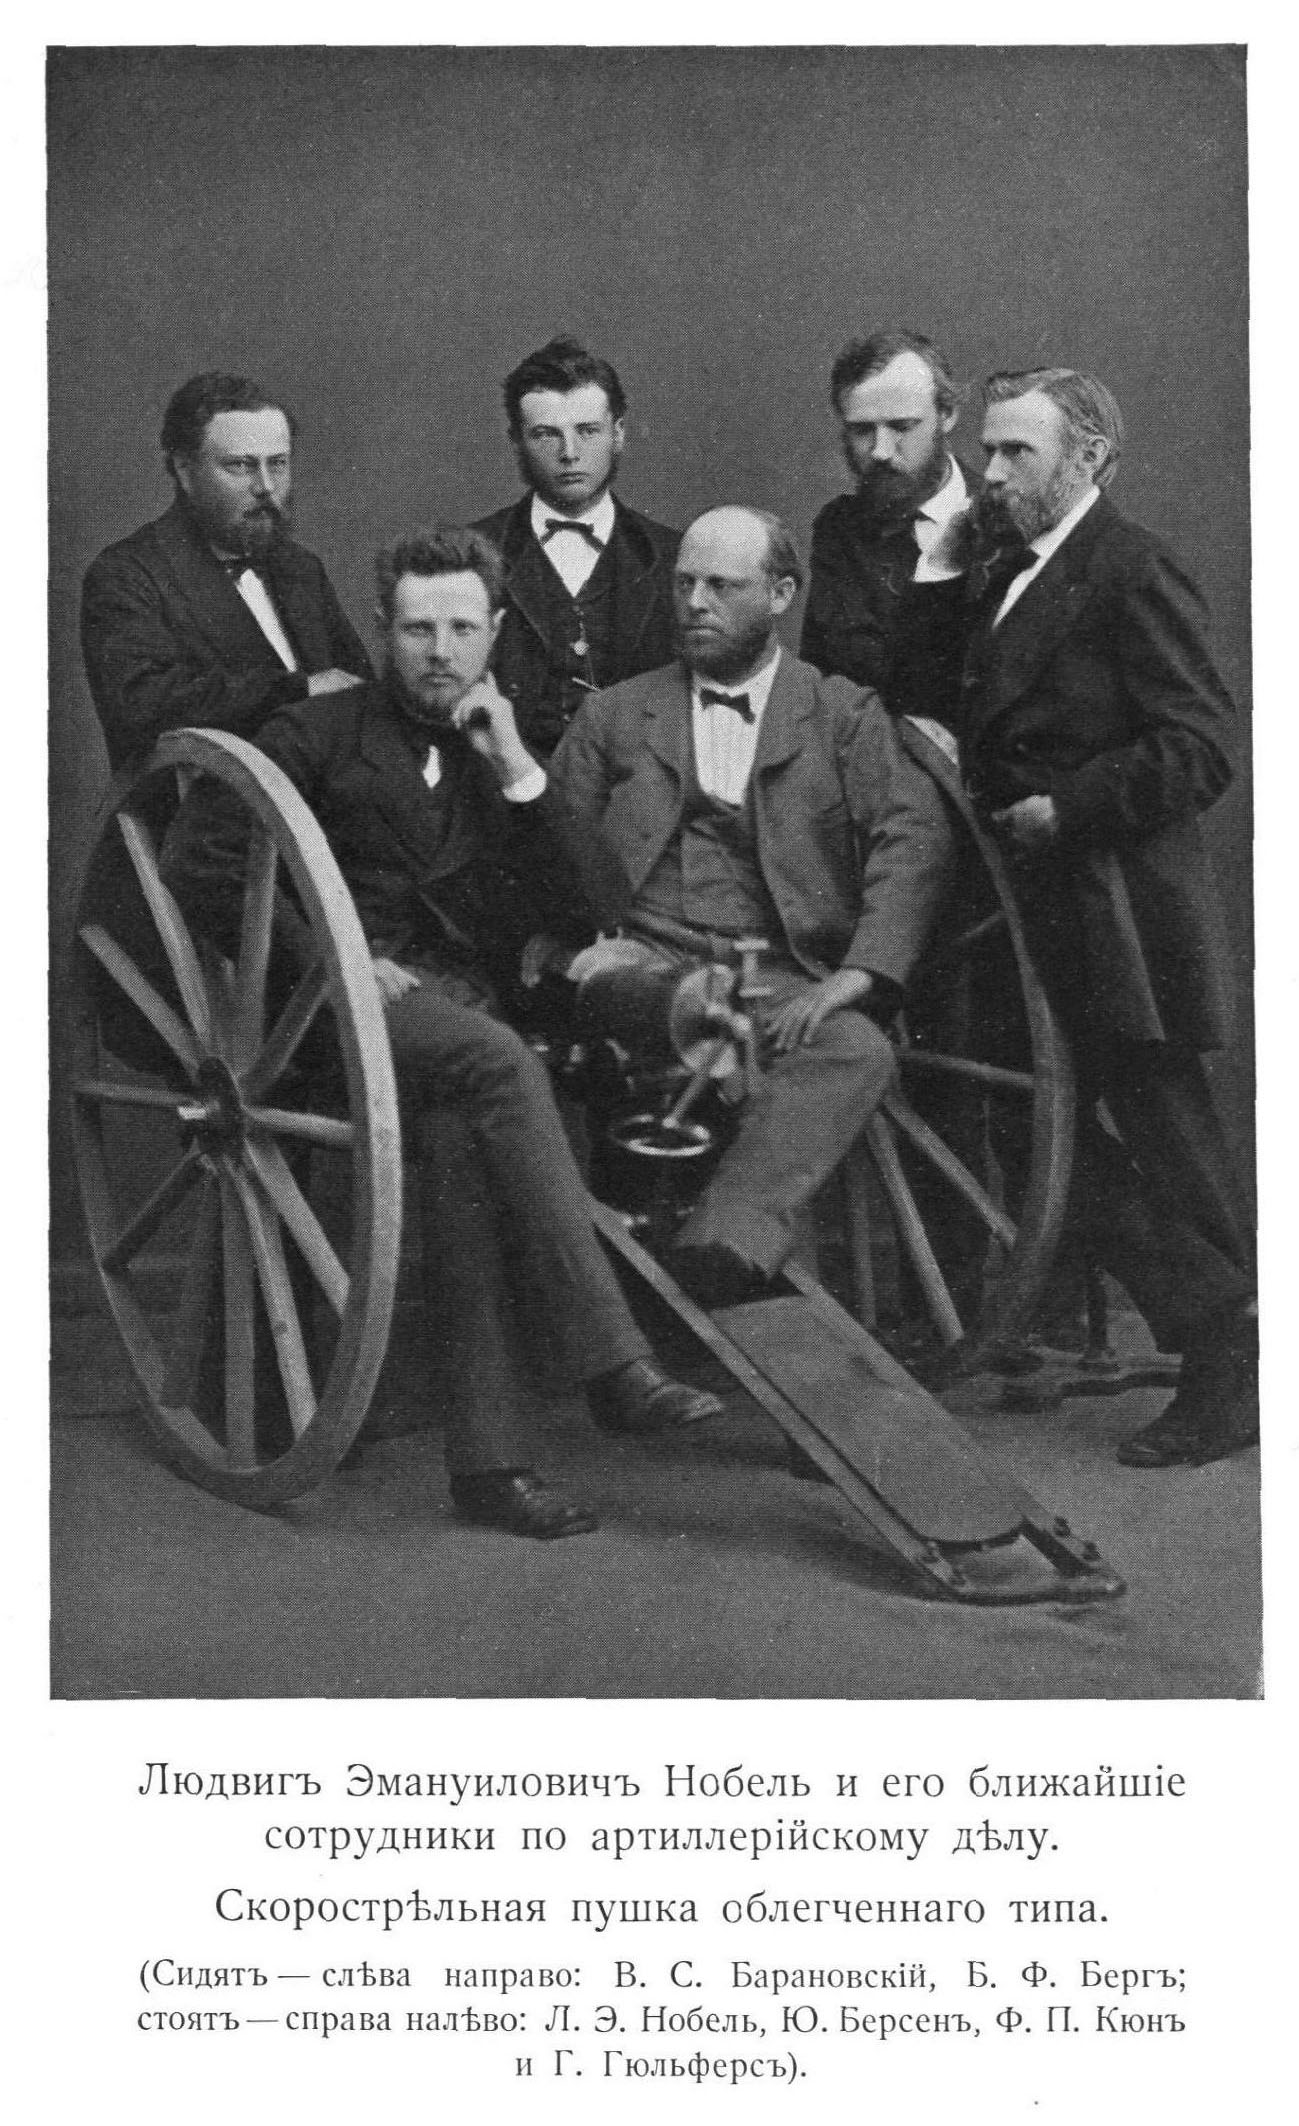 The foundation of the Nobel family wealth was laid by arms industry. Ludvig Nobel together with artillery engineers Baranovsky, Berg, Bersen, Hülphers, Kühn posing proudly around a lightweight rapid-fire gun. Ludvig is standing on the far right.